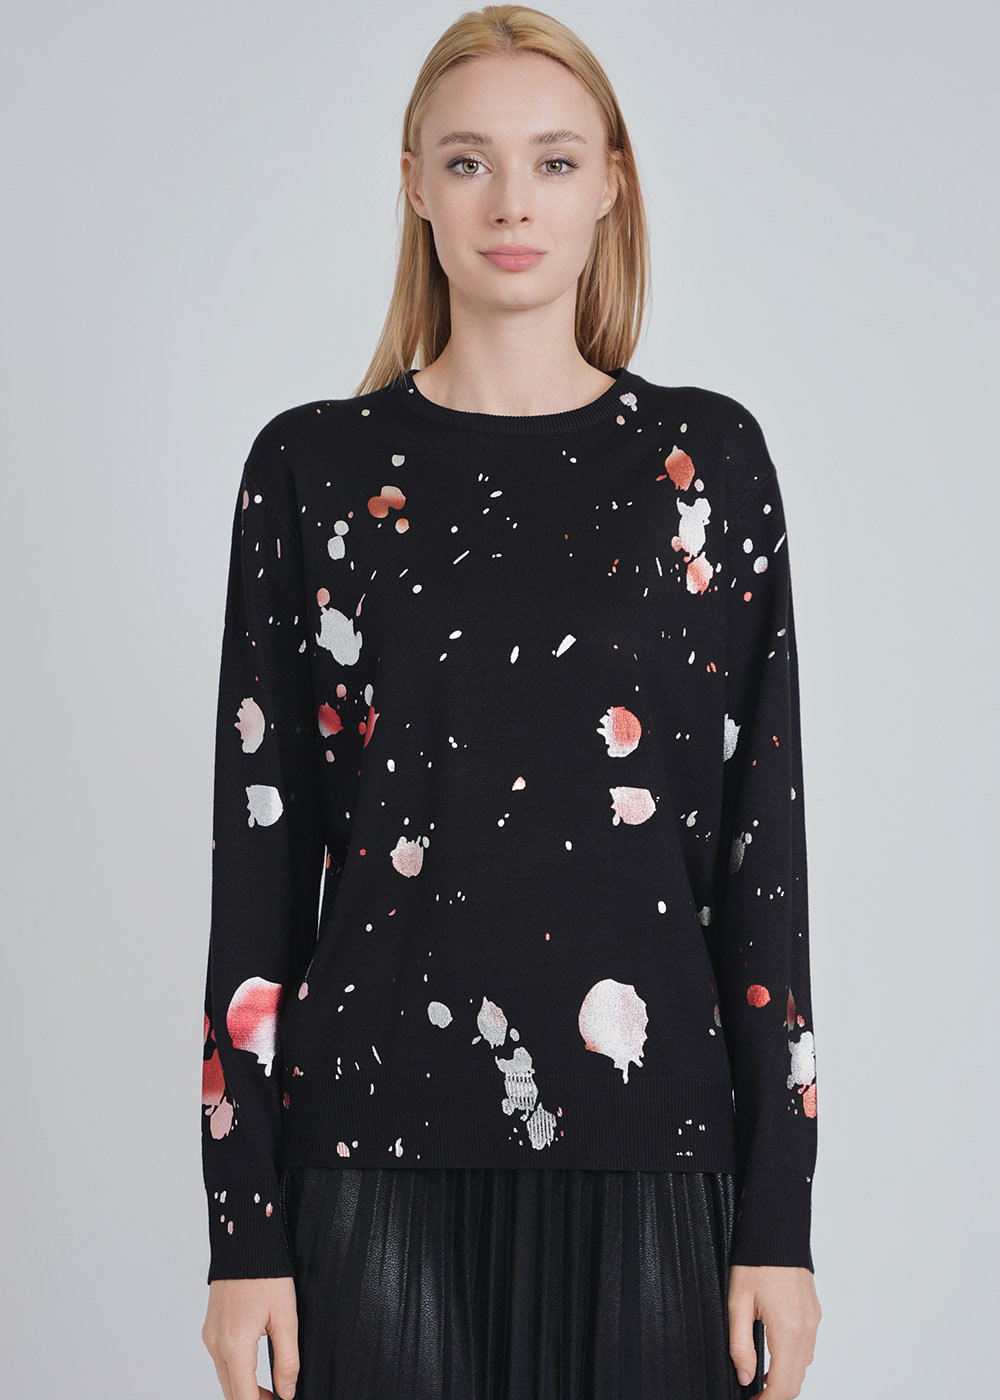 Unique Spotted Patterns on Black Knit Sweater